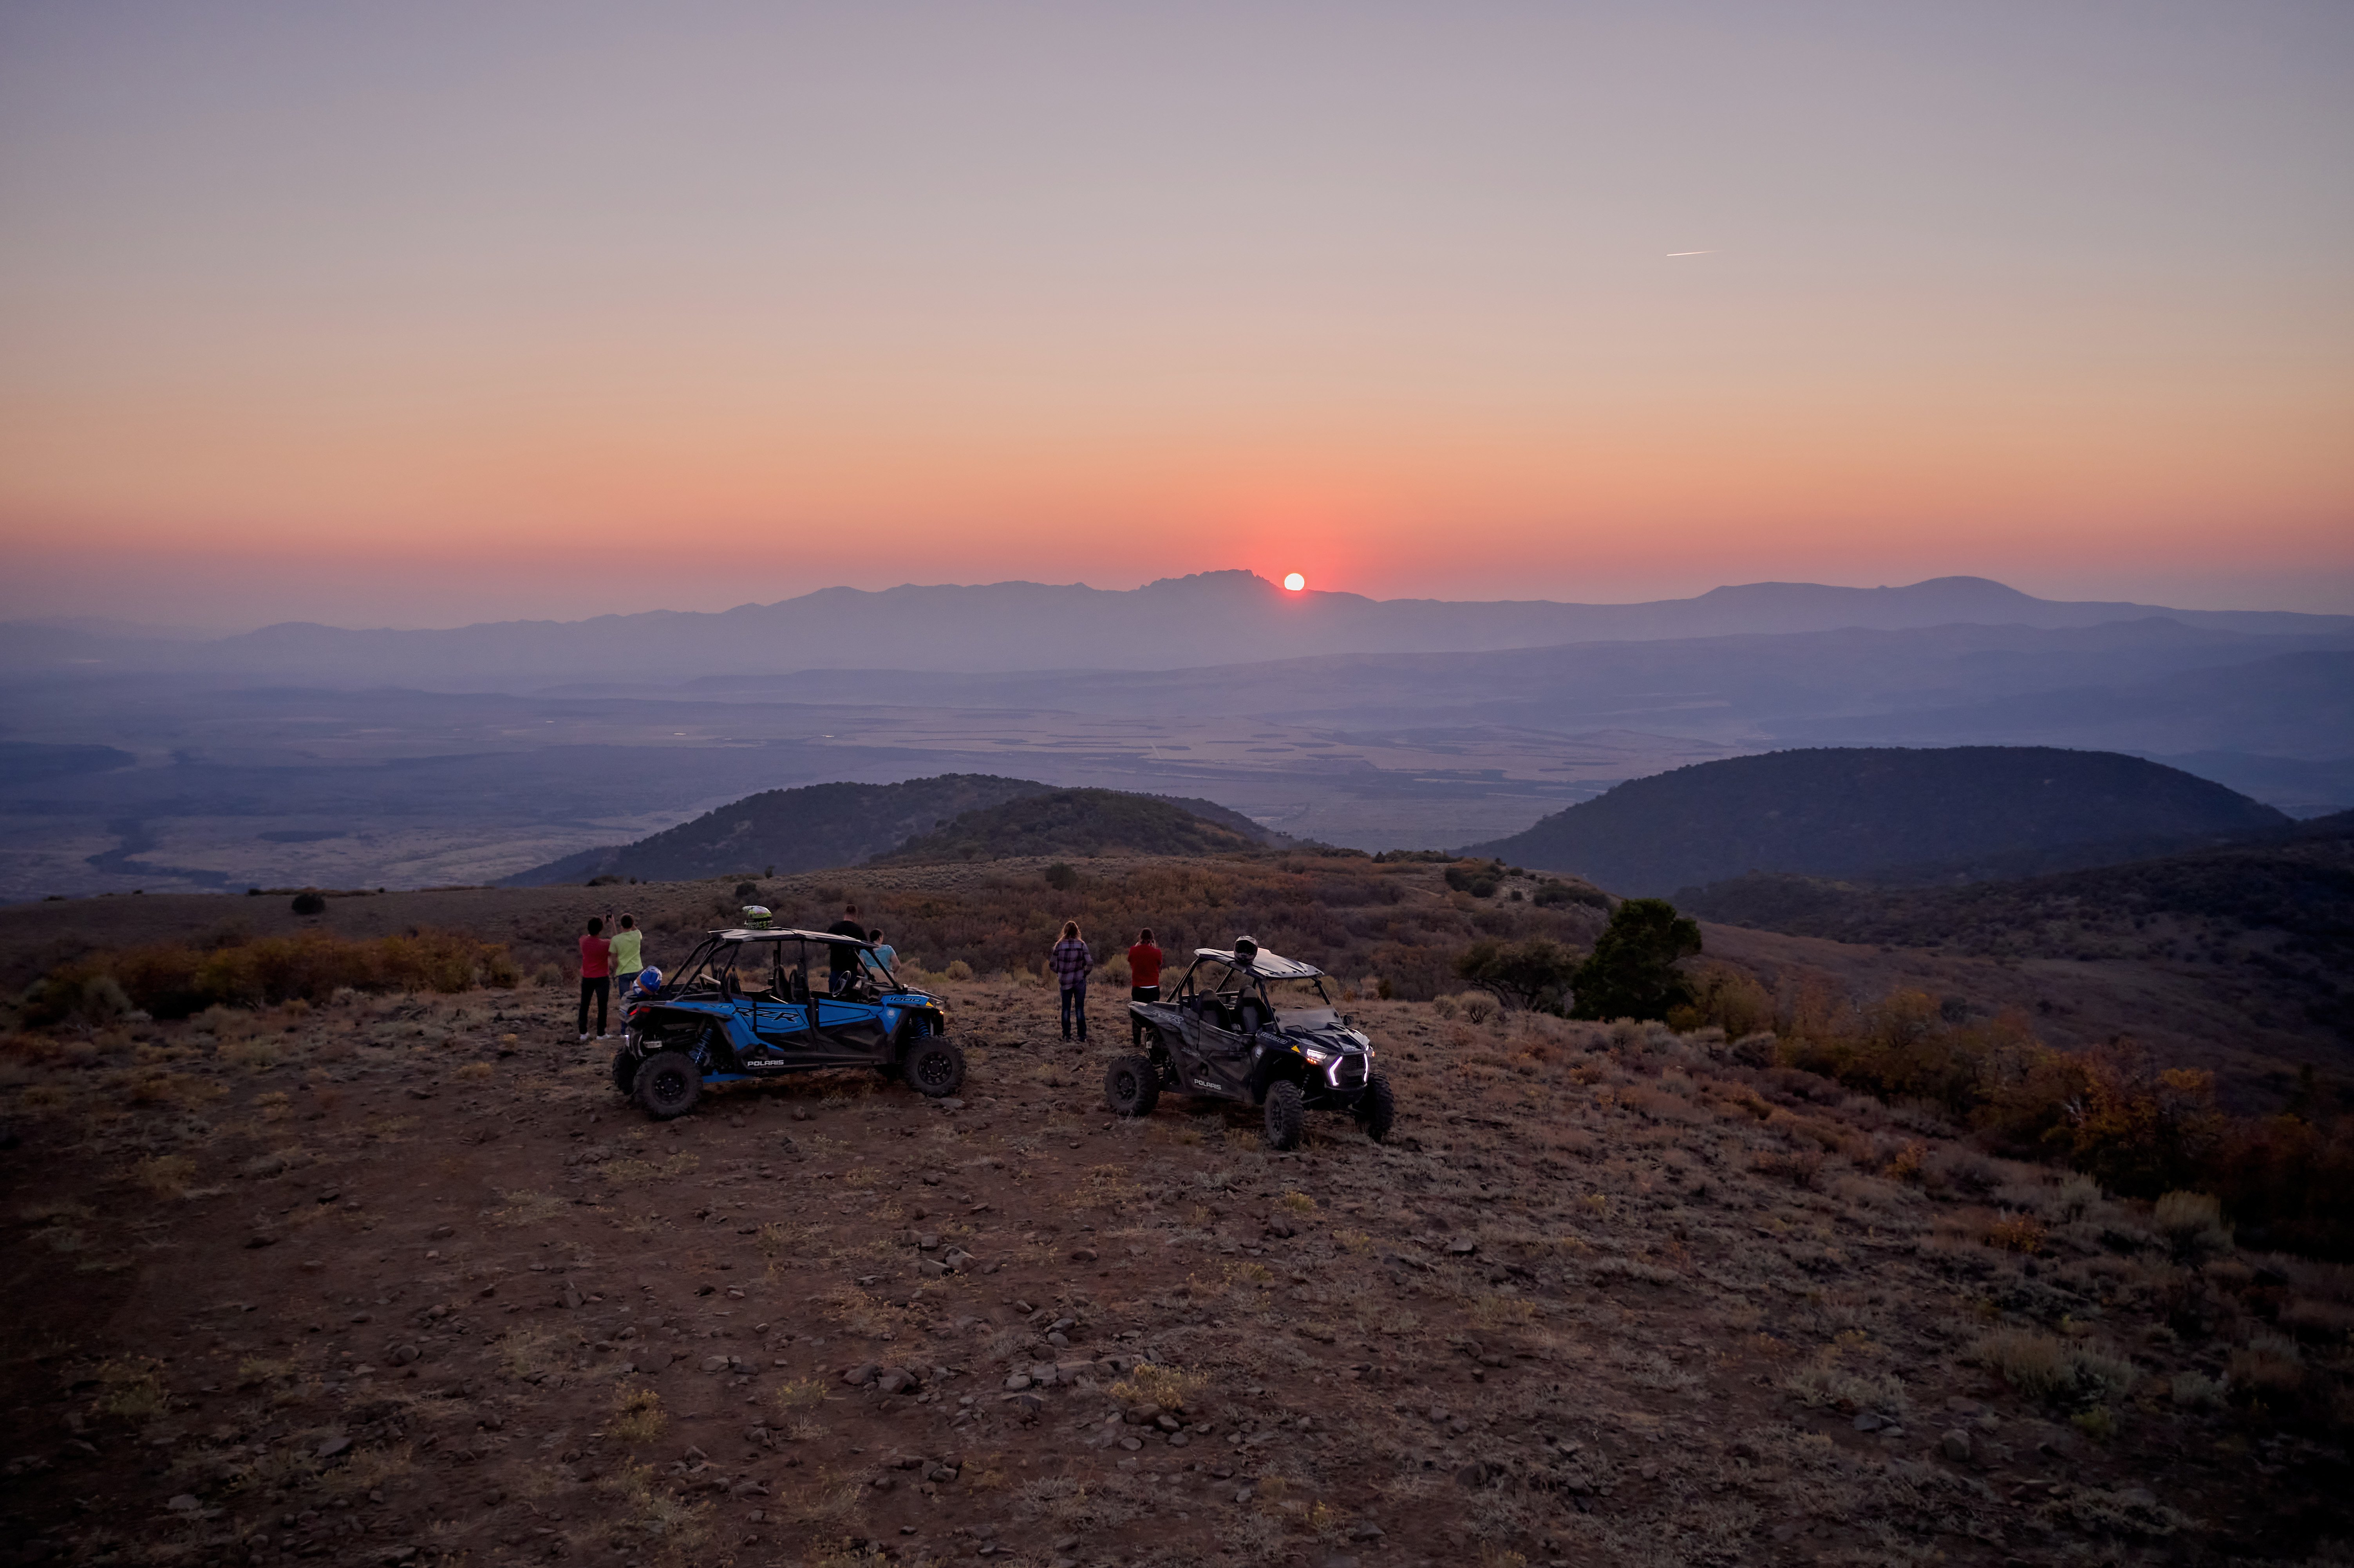 More information about "Discover the Thrills of the Outdoors with Polaris Adventures Program"